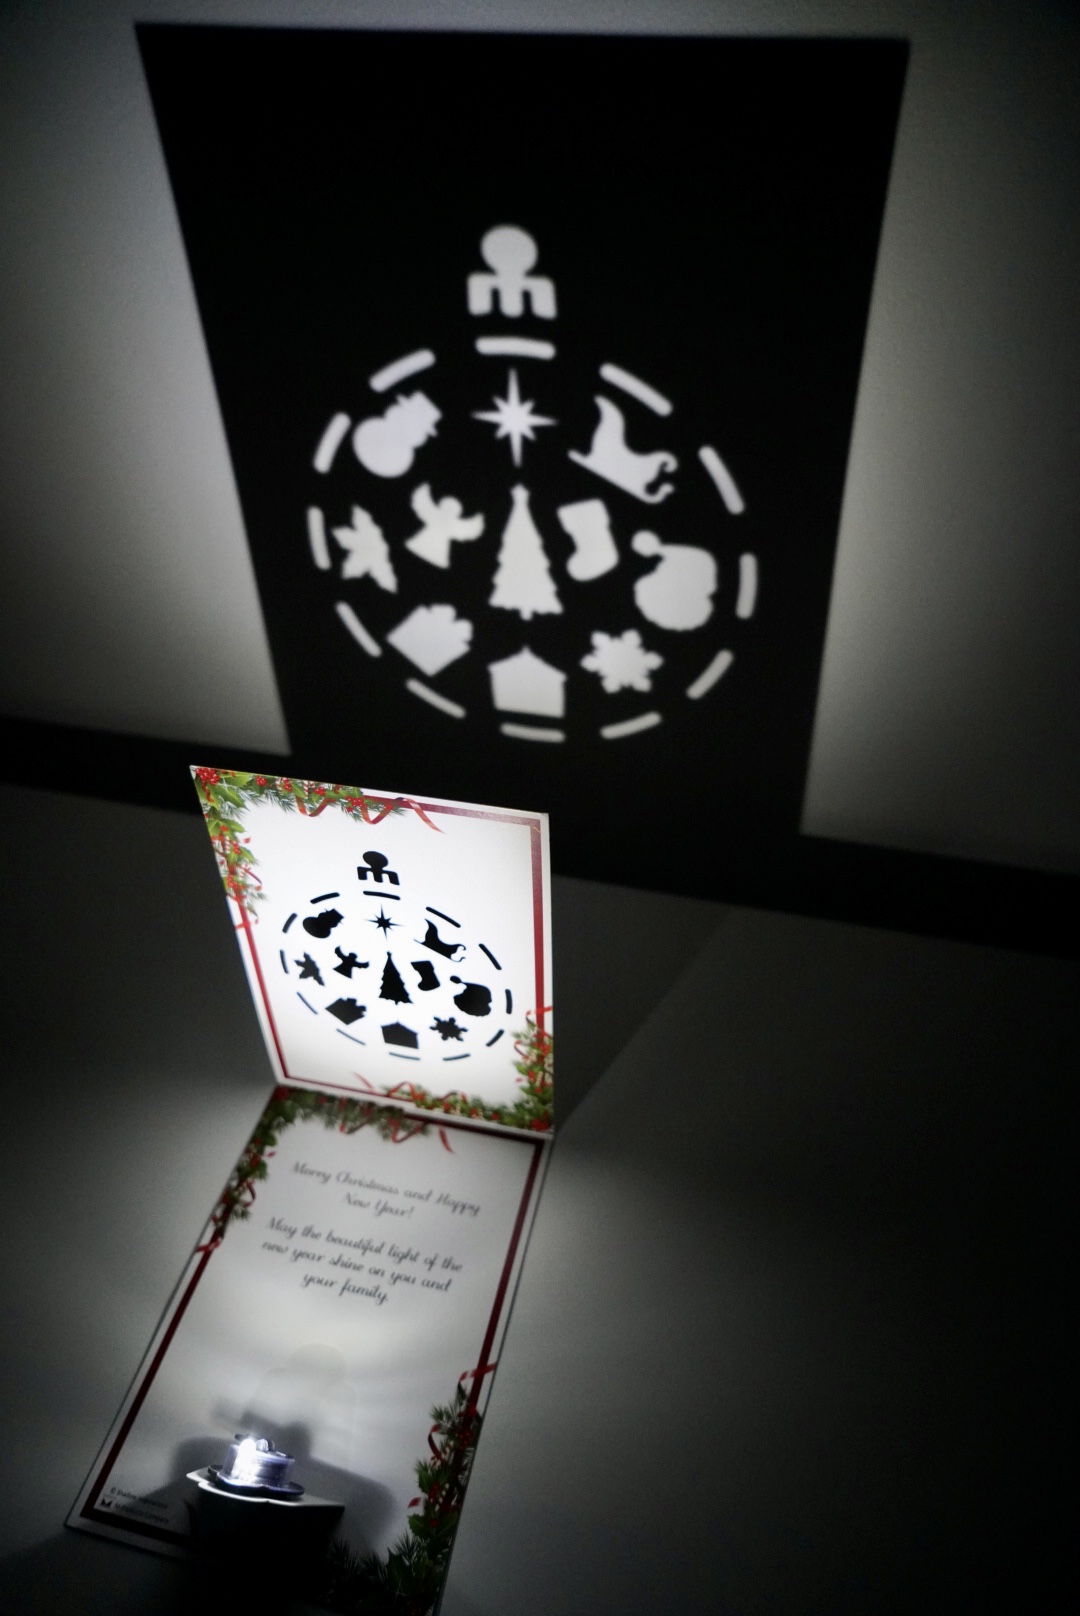 Top view of card and shadow image